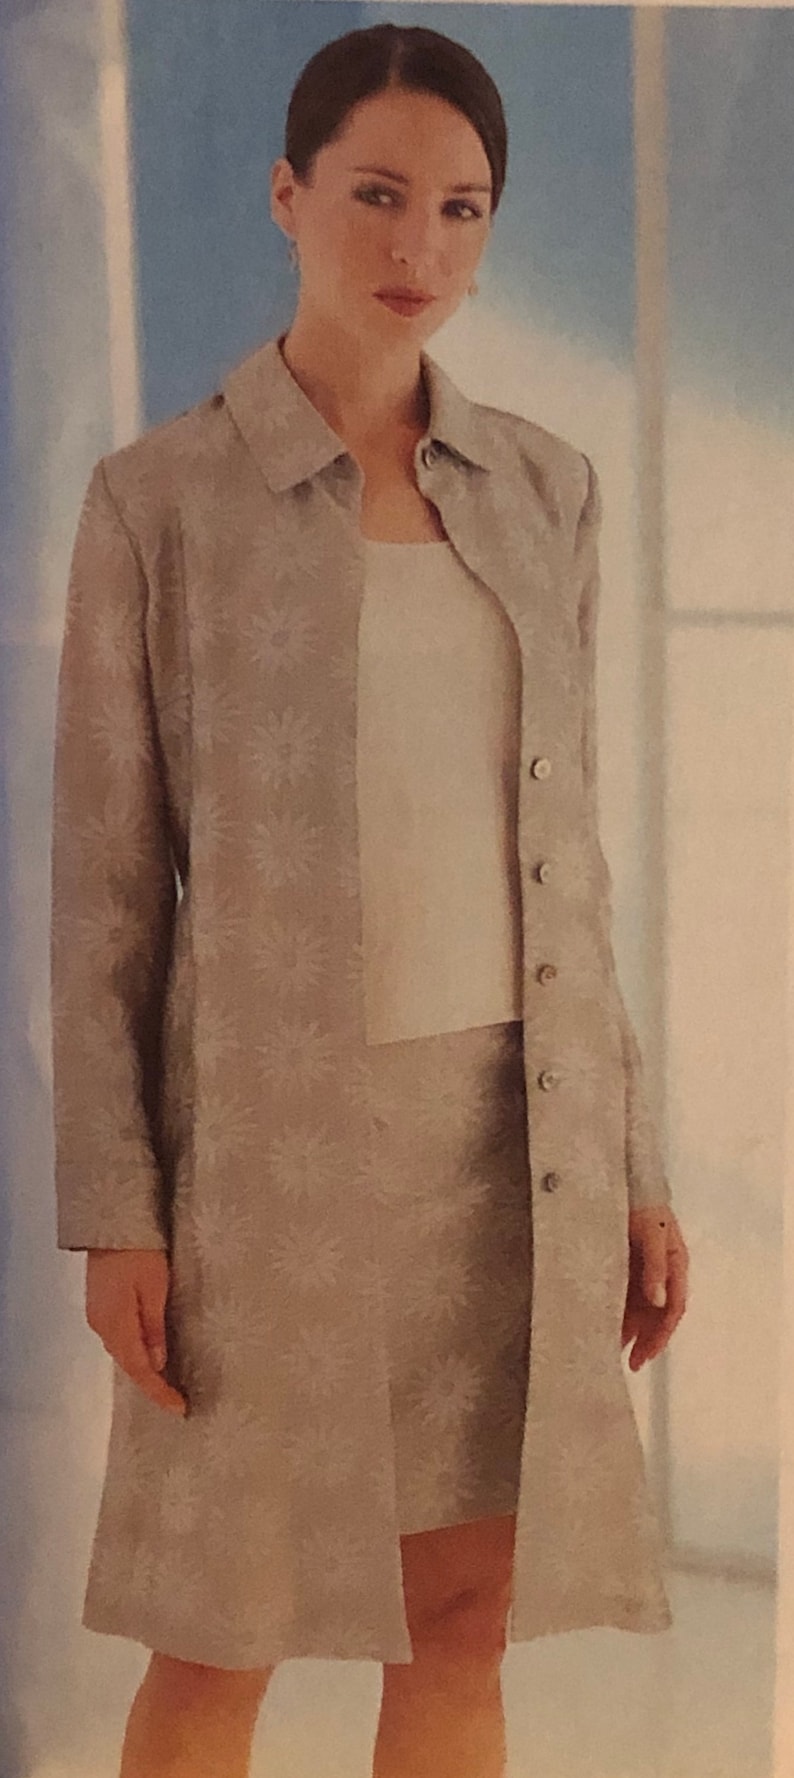 Easy 2001 Belt /& Skirt Complete unused Size 20-22-24 neatly cut OOP 3033 Butterick Misses/' Jacket Excellent condition.